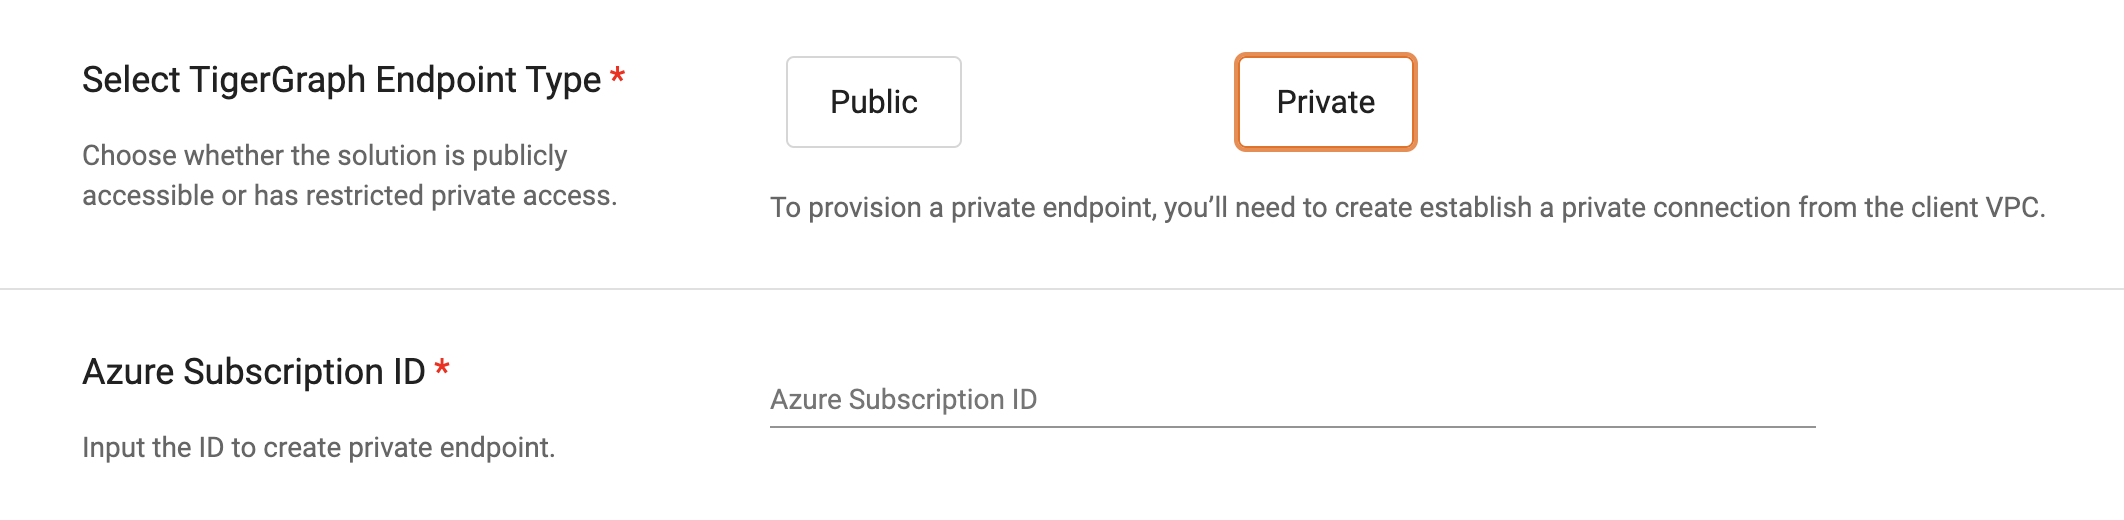 enable private access azure